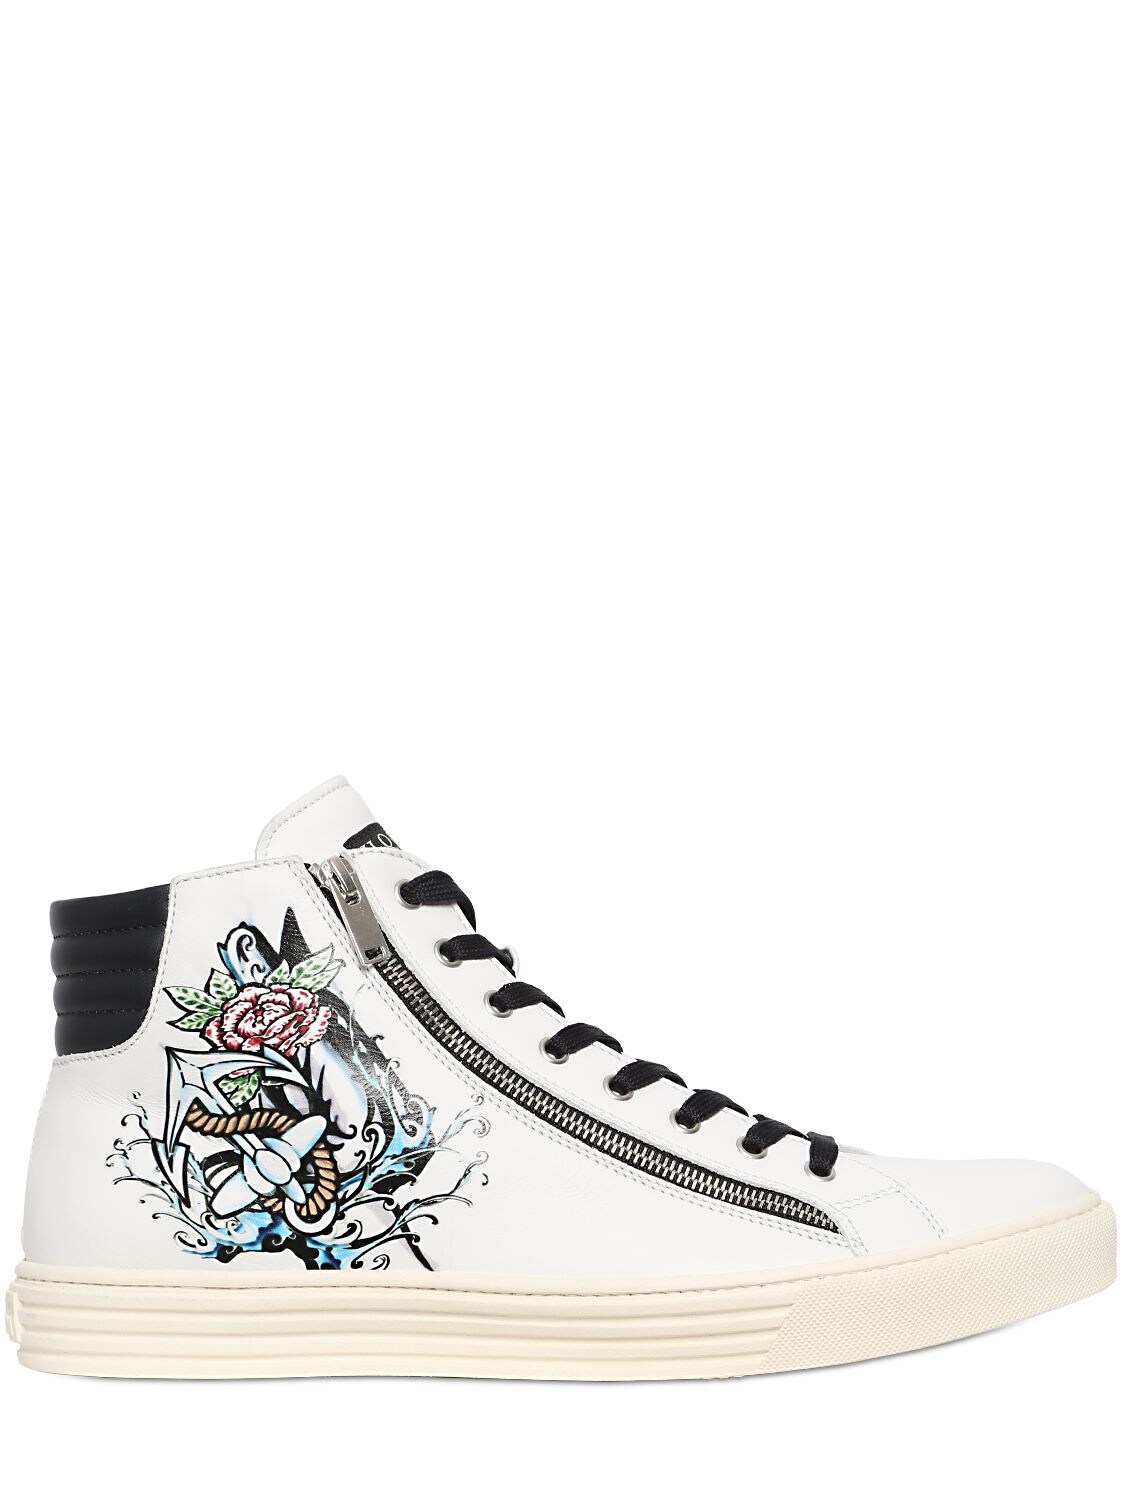 TATTOO PRINTED LEATHER HIGH TOP SNEAKERS